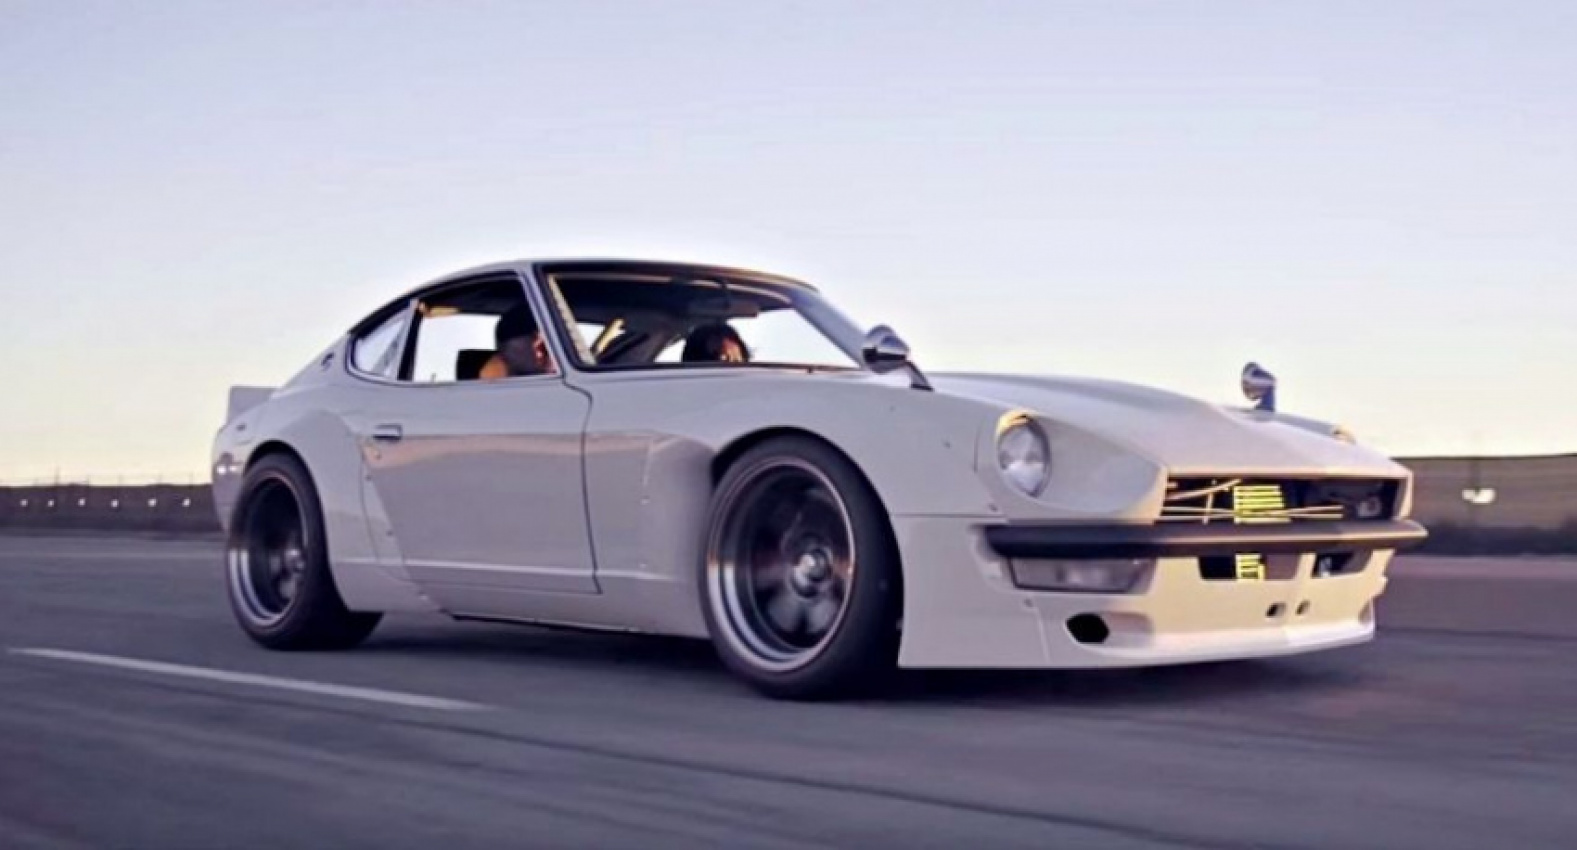 autos, cars, datsun, 240z, auto news, classic, greddy, gt-r, nissan, r34, rb26, sema, fugu z - fast and furious actor sung kang’s dream gt-r-engined datsun 240z